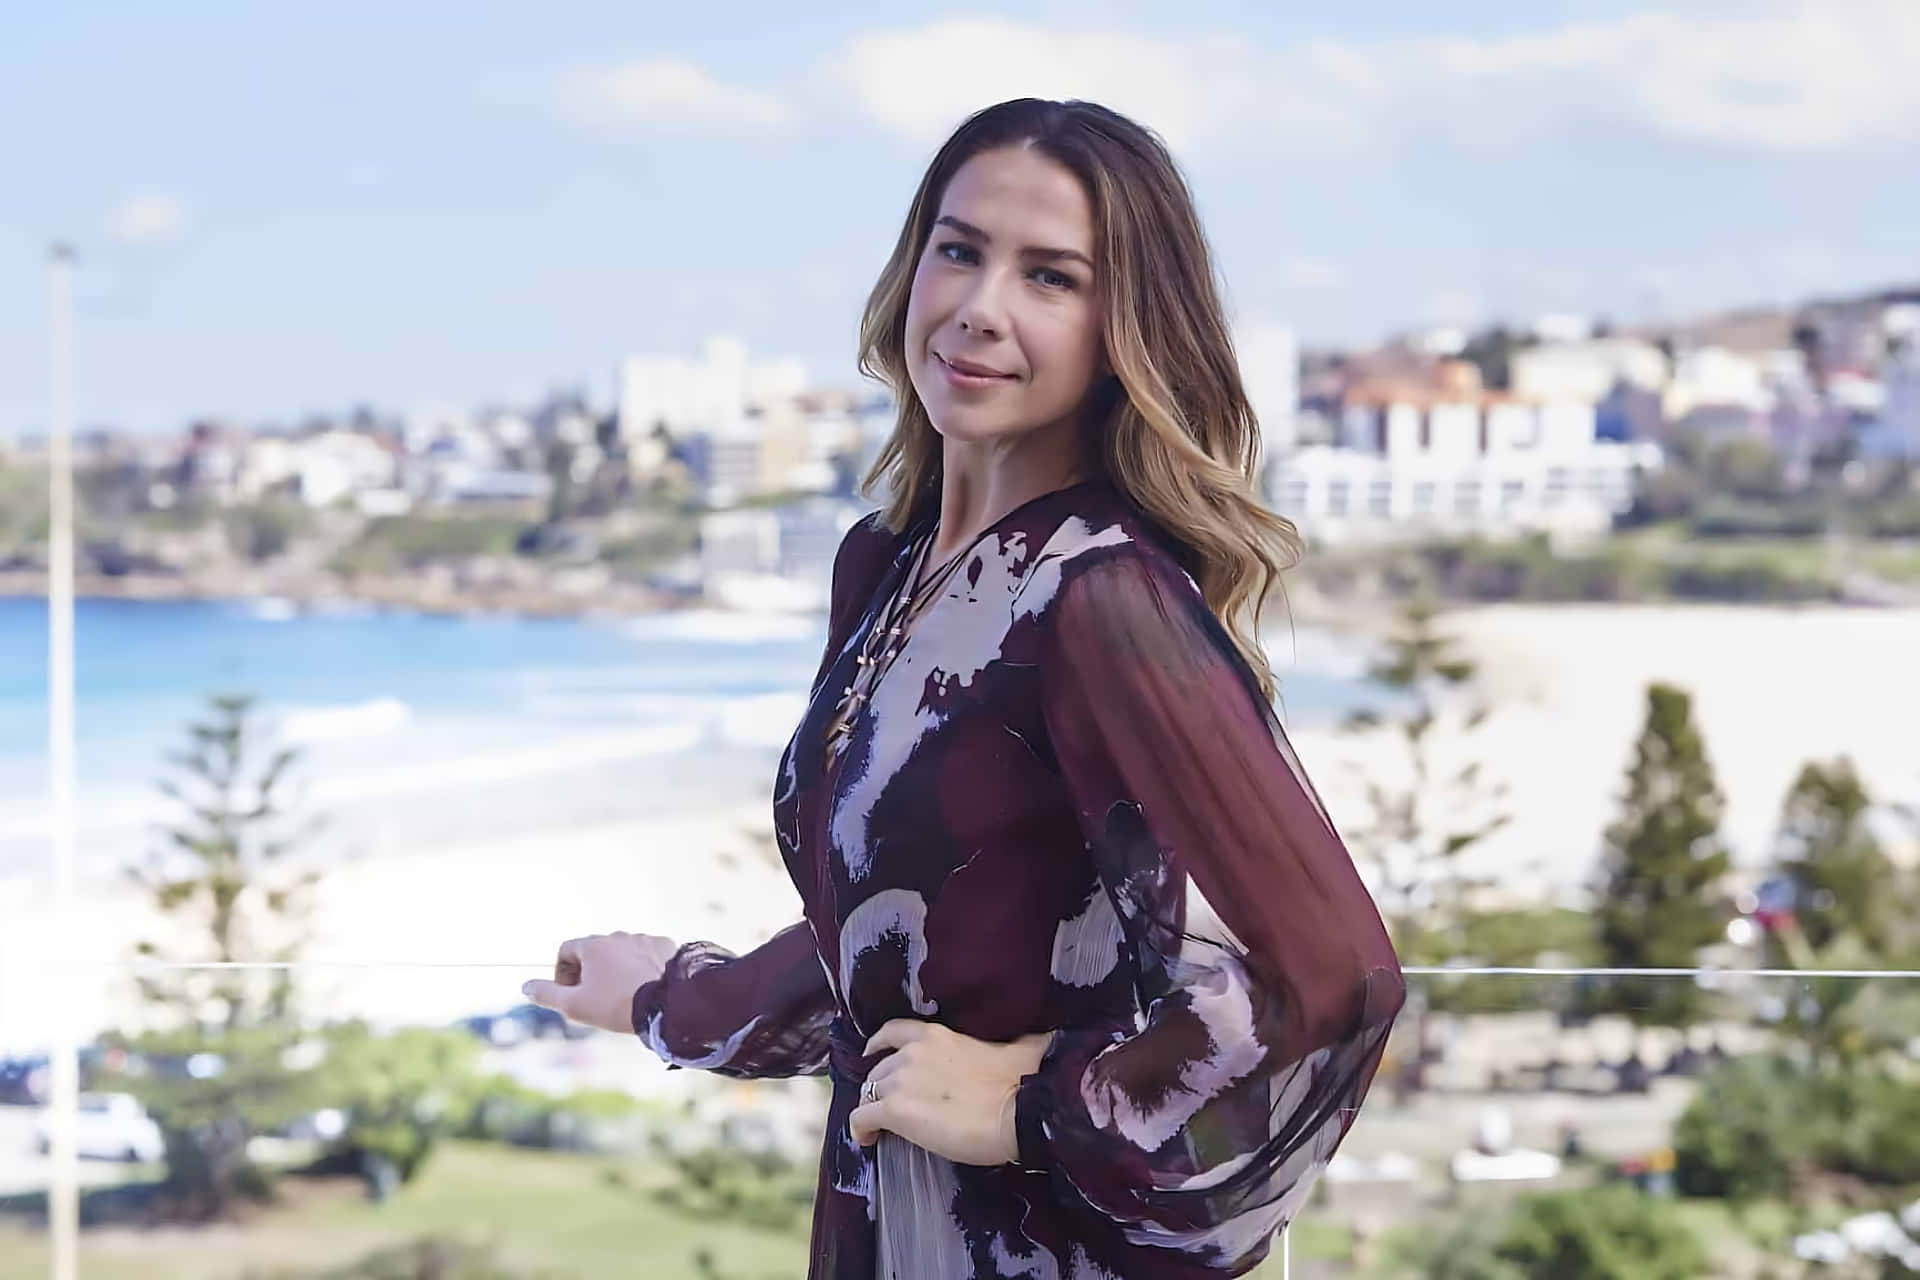 Kate Ritchie smiling at the camera in a beautiful outfit. Wallpaper